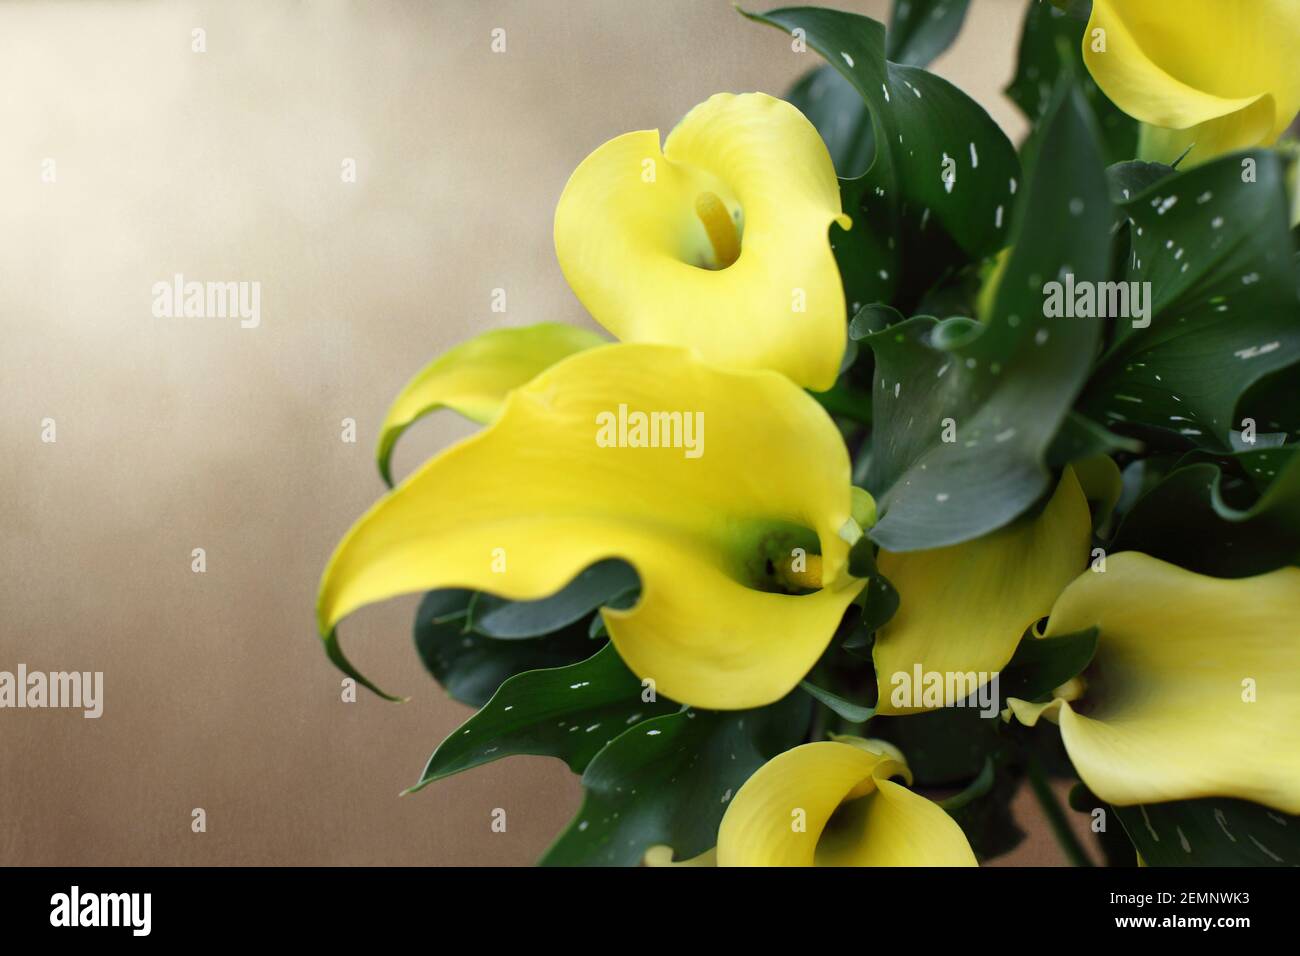 Overhead view of beautiful potted yellow Calla Lilies, Zantedeschia aethiopica; over a copper background with room for text. Image shot from top view. Stock Photo